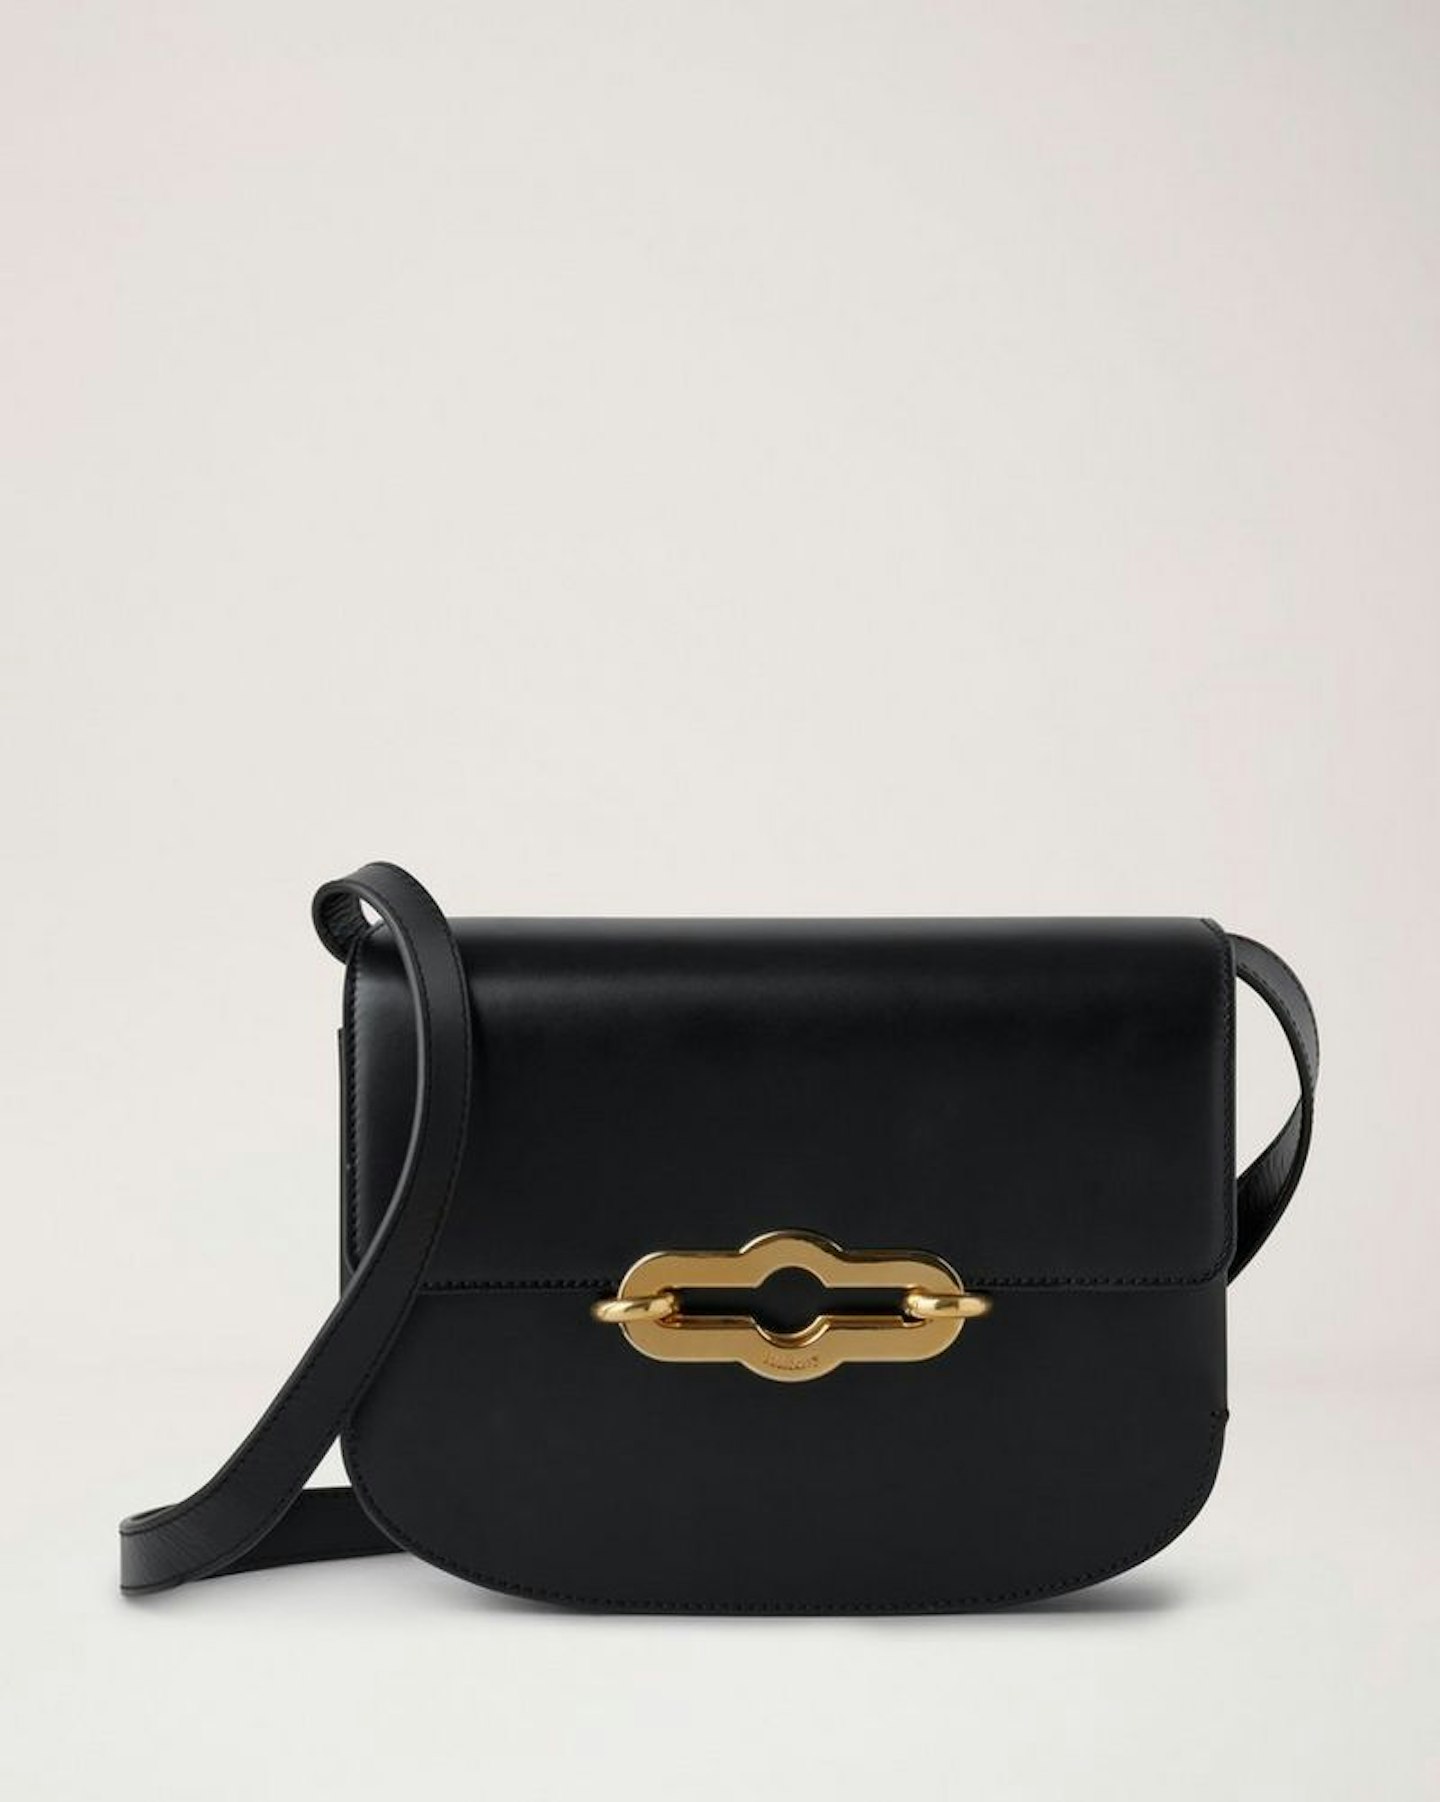 Mulberry Pimlico Bag: Meet The New Addition To The Brand's Iconic ...